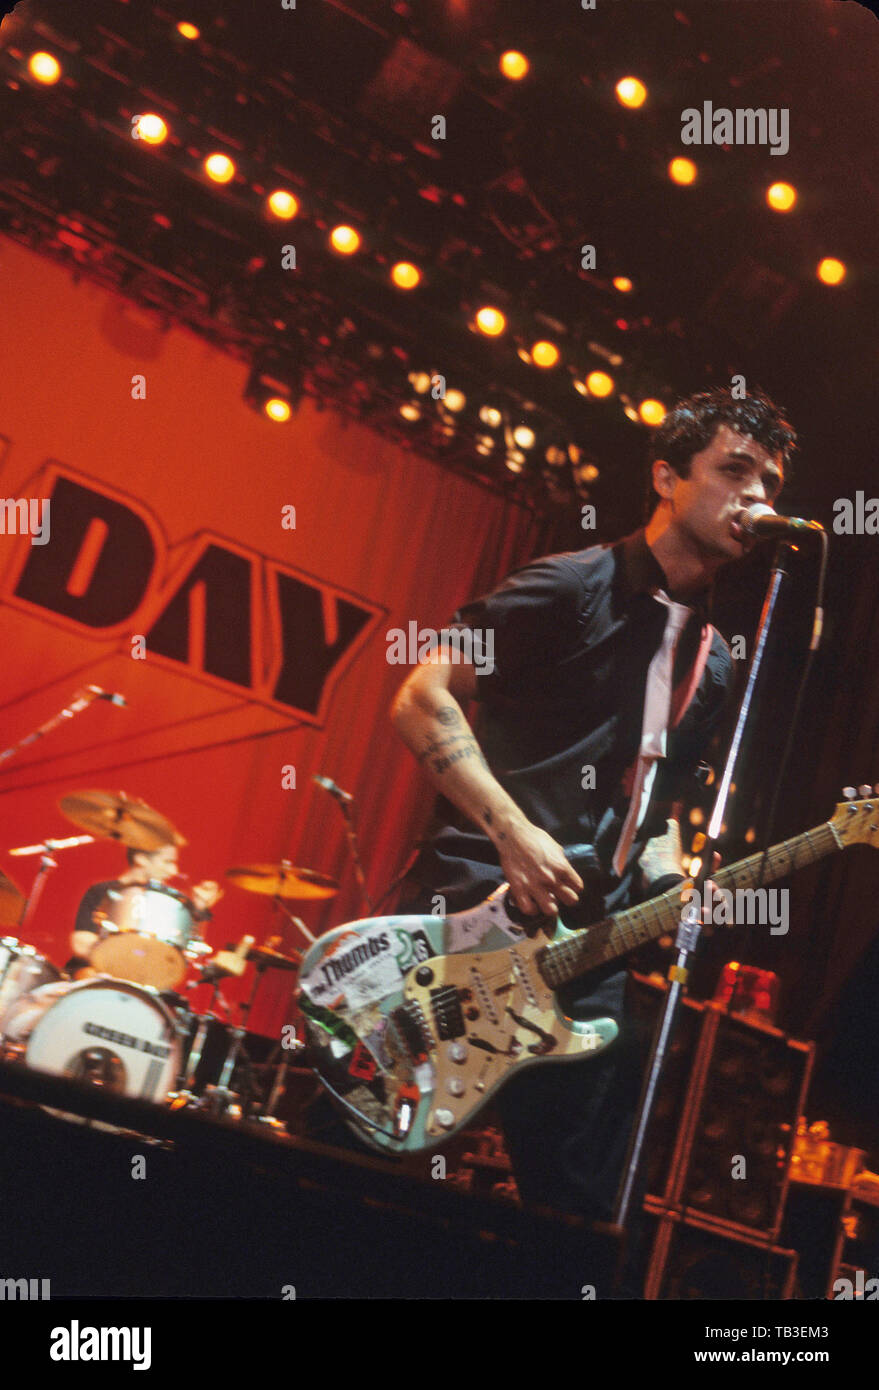 GREEN DAY US rock group with  Tre Cool and Billie Joe Armstrong  in concert at Verizon Wireless Amphitheater on April 20, 2002 in Irvine, California. Photo: Jeffrey Mayer Stock Photo